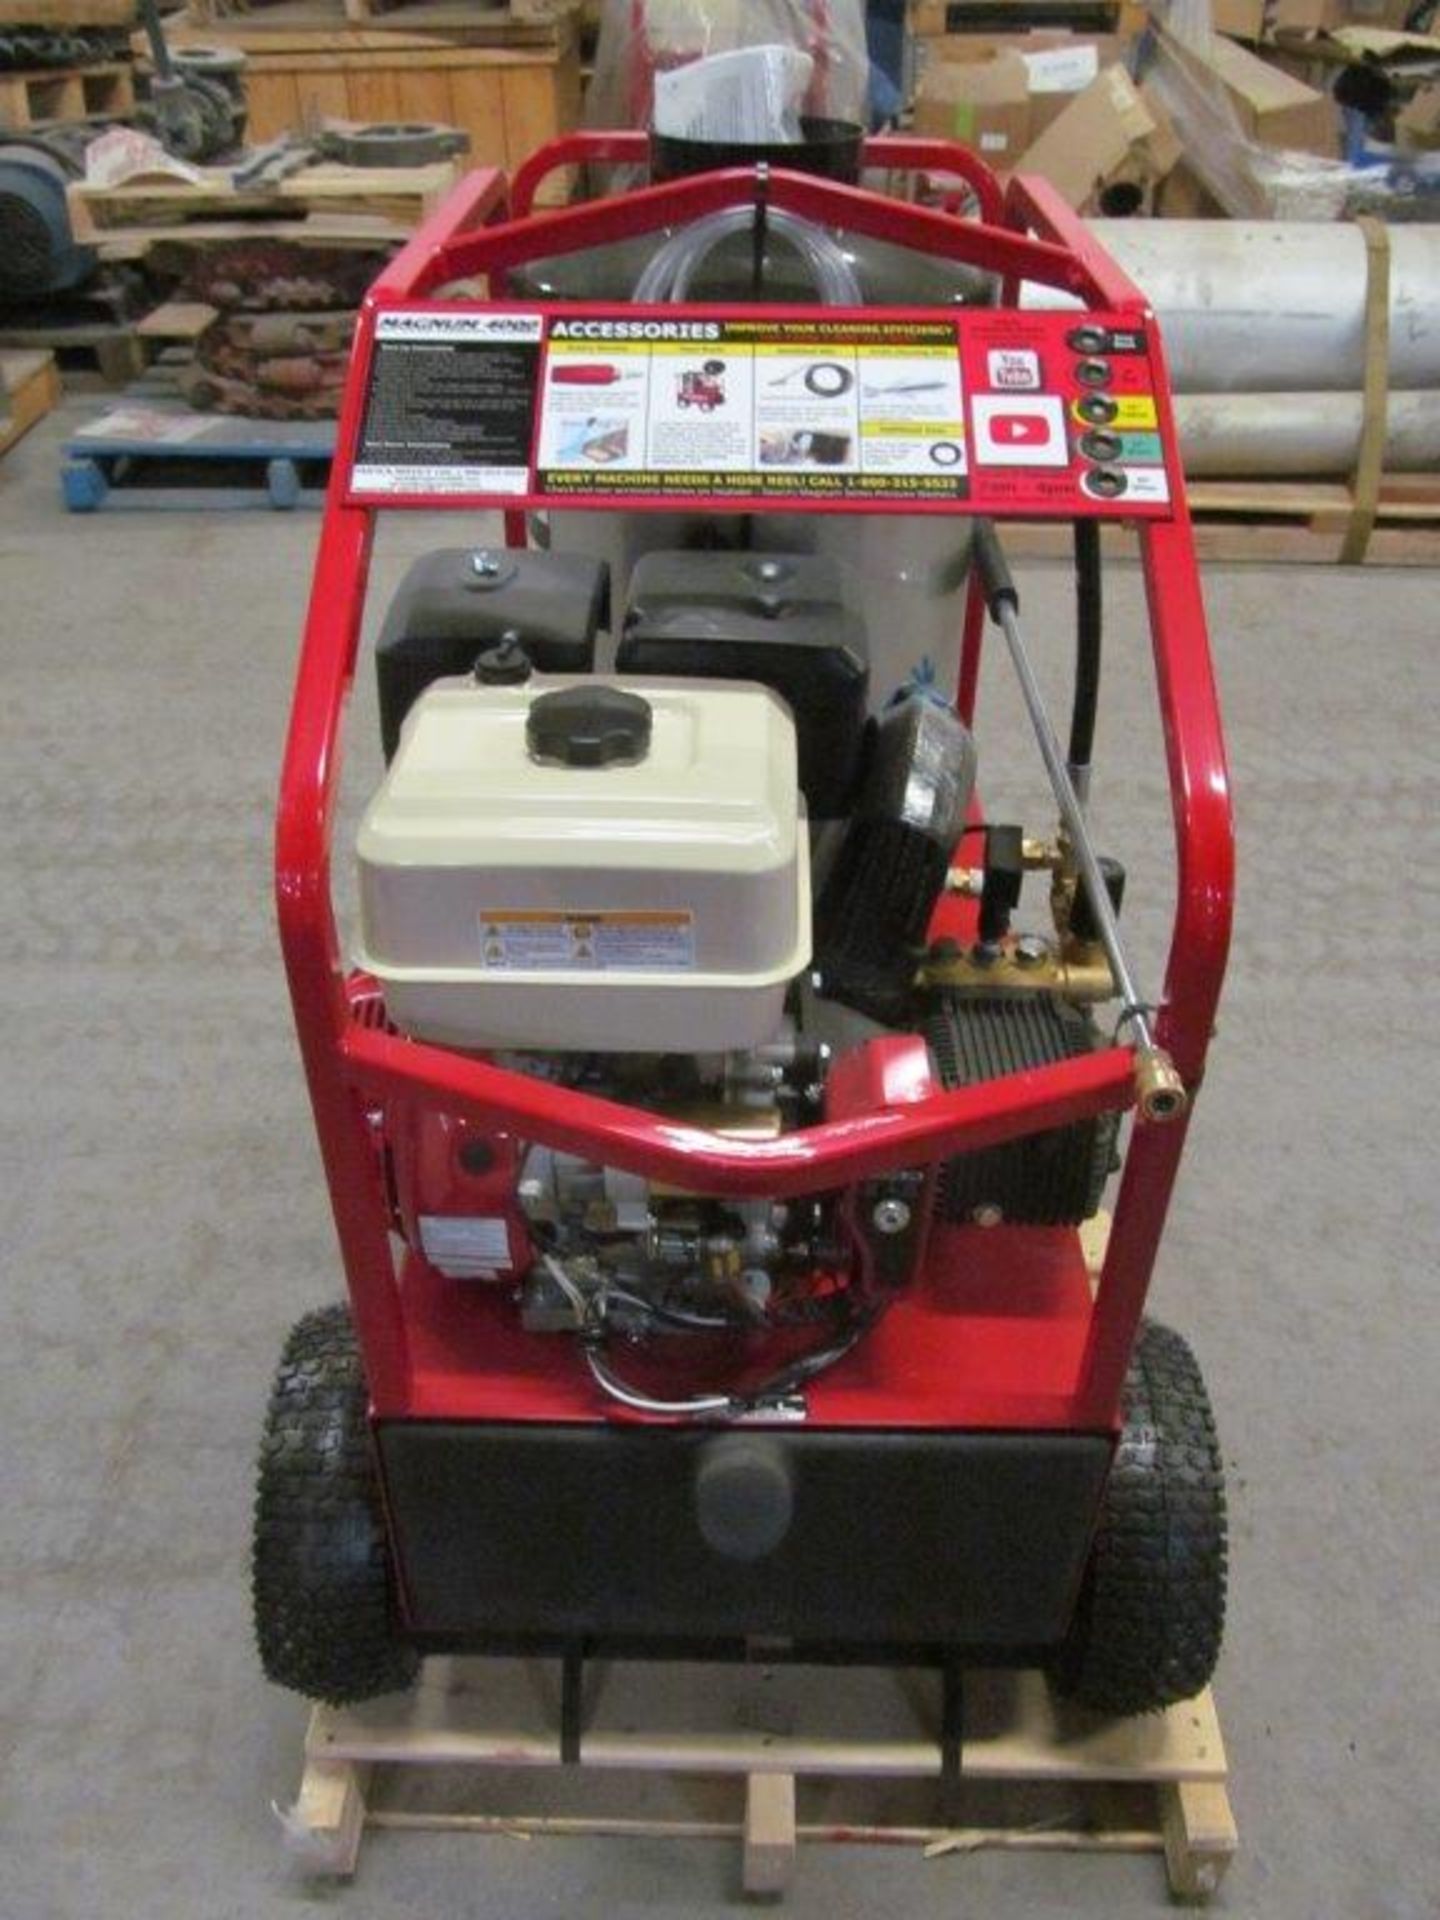 BRAND NEW EASY-KLEEN HOT WATER PRESSURE WASHER MODEL MAGNUM GOLD, LOCATION: HAWKESBURY, ONTARIO - Image 3 of 11